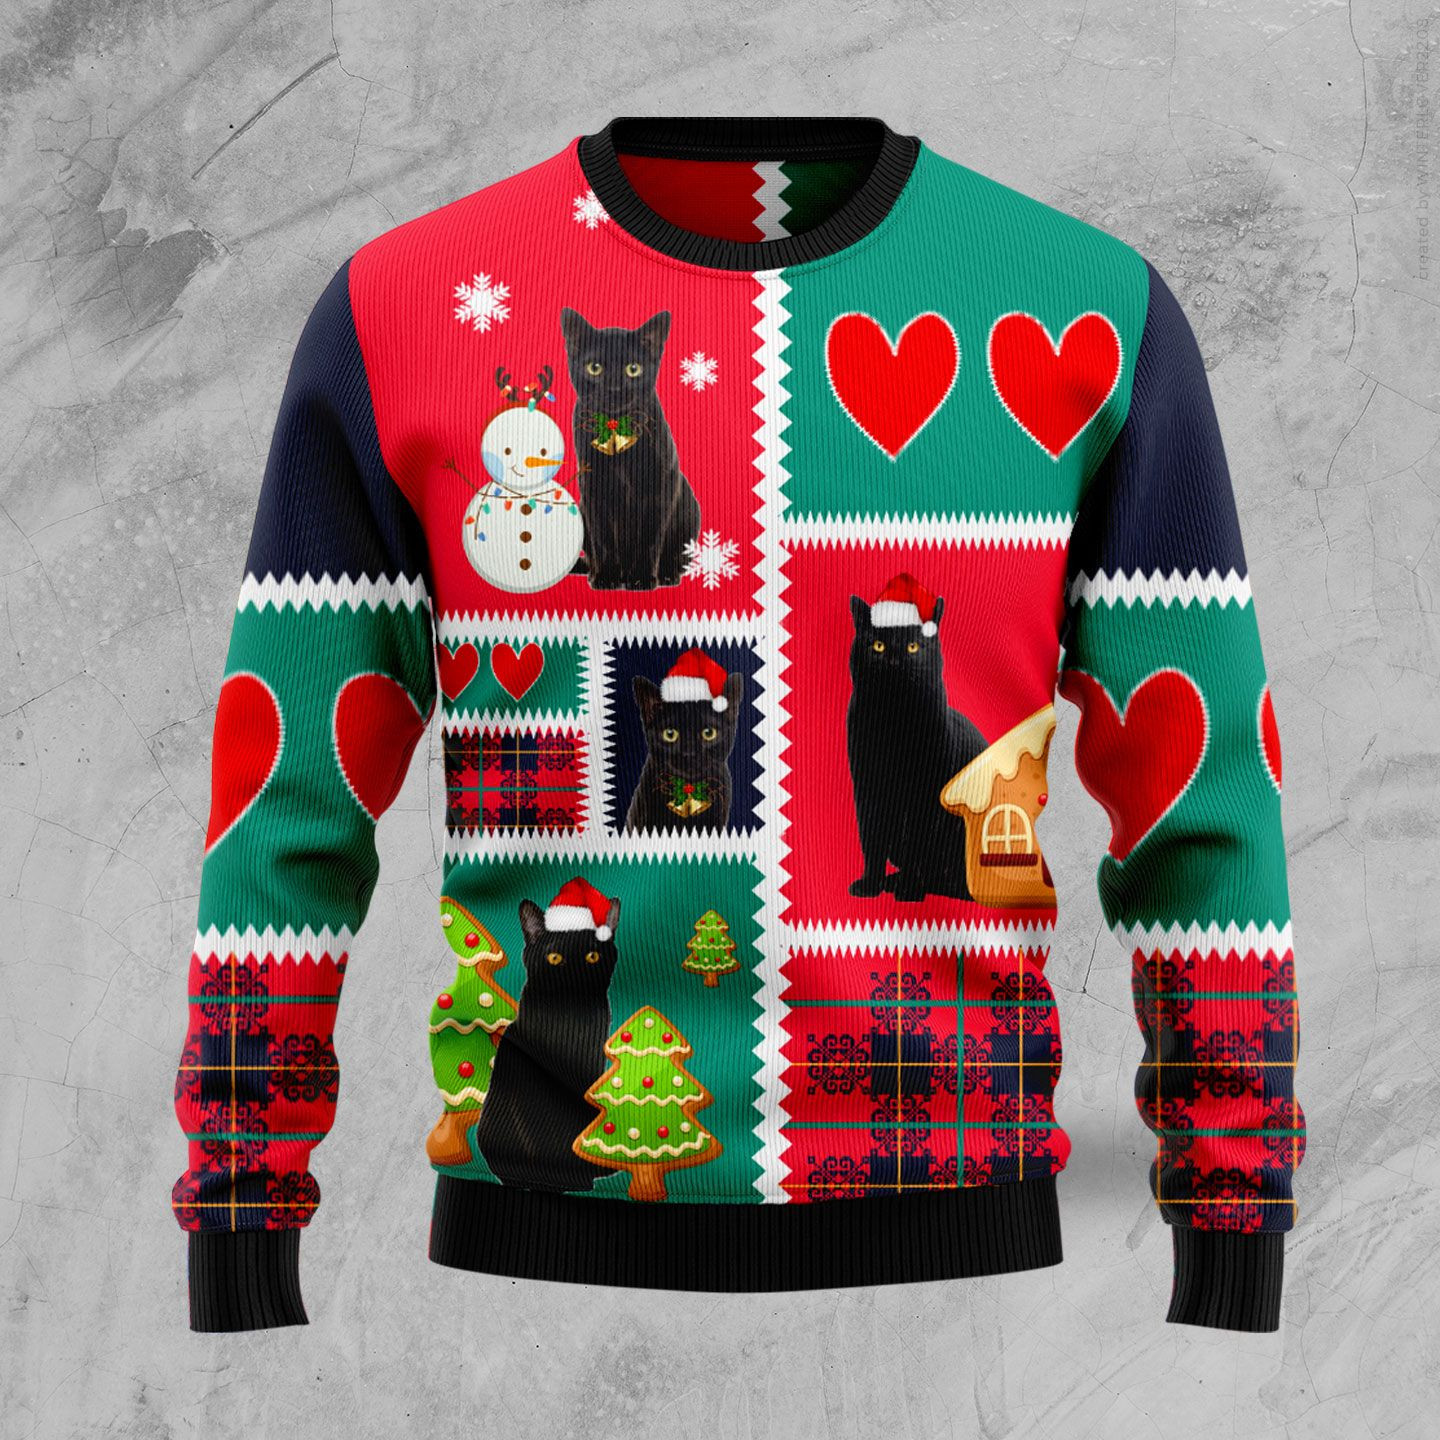 Black Cat Snow Ugly Christmas Sweater Ugly Sweater For Men Women, Holiday Sweater